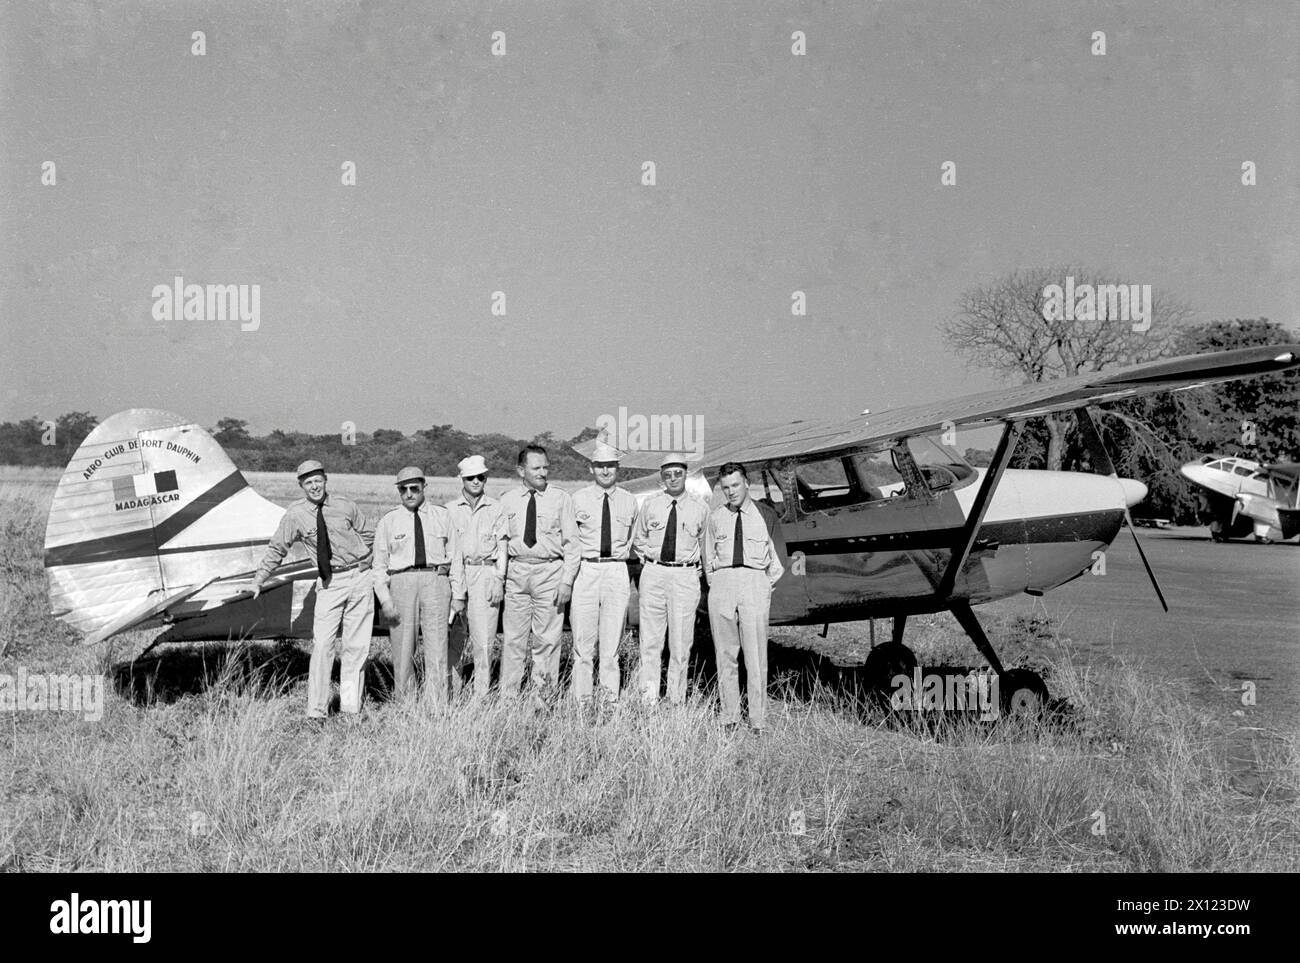 French Colonists or Colonial Members of the Aero Club de Fort Dauphin posing in Front of a Cessna 170 Light Airplane, Plane or Aircraft (produced from 1948-1956) at the Airfield or Airport of Fort Dauphin Madagascar. Vintage or Historic Monochrome or Black and White Image c1960. Stock Photo